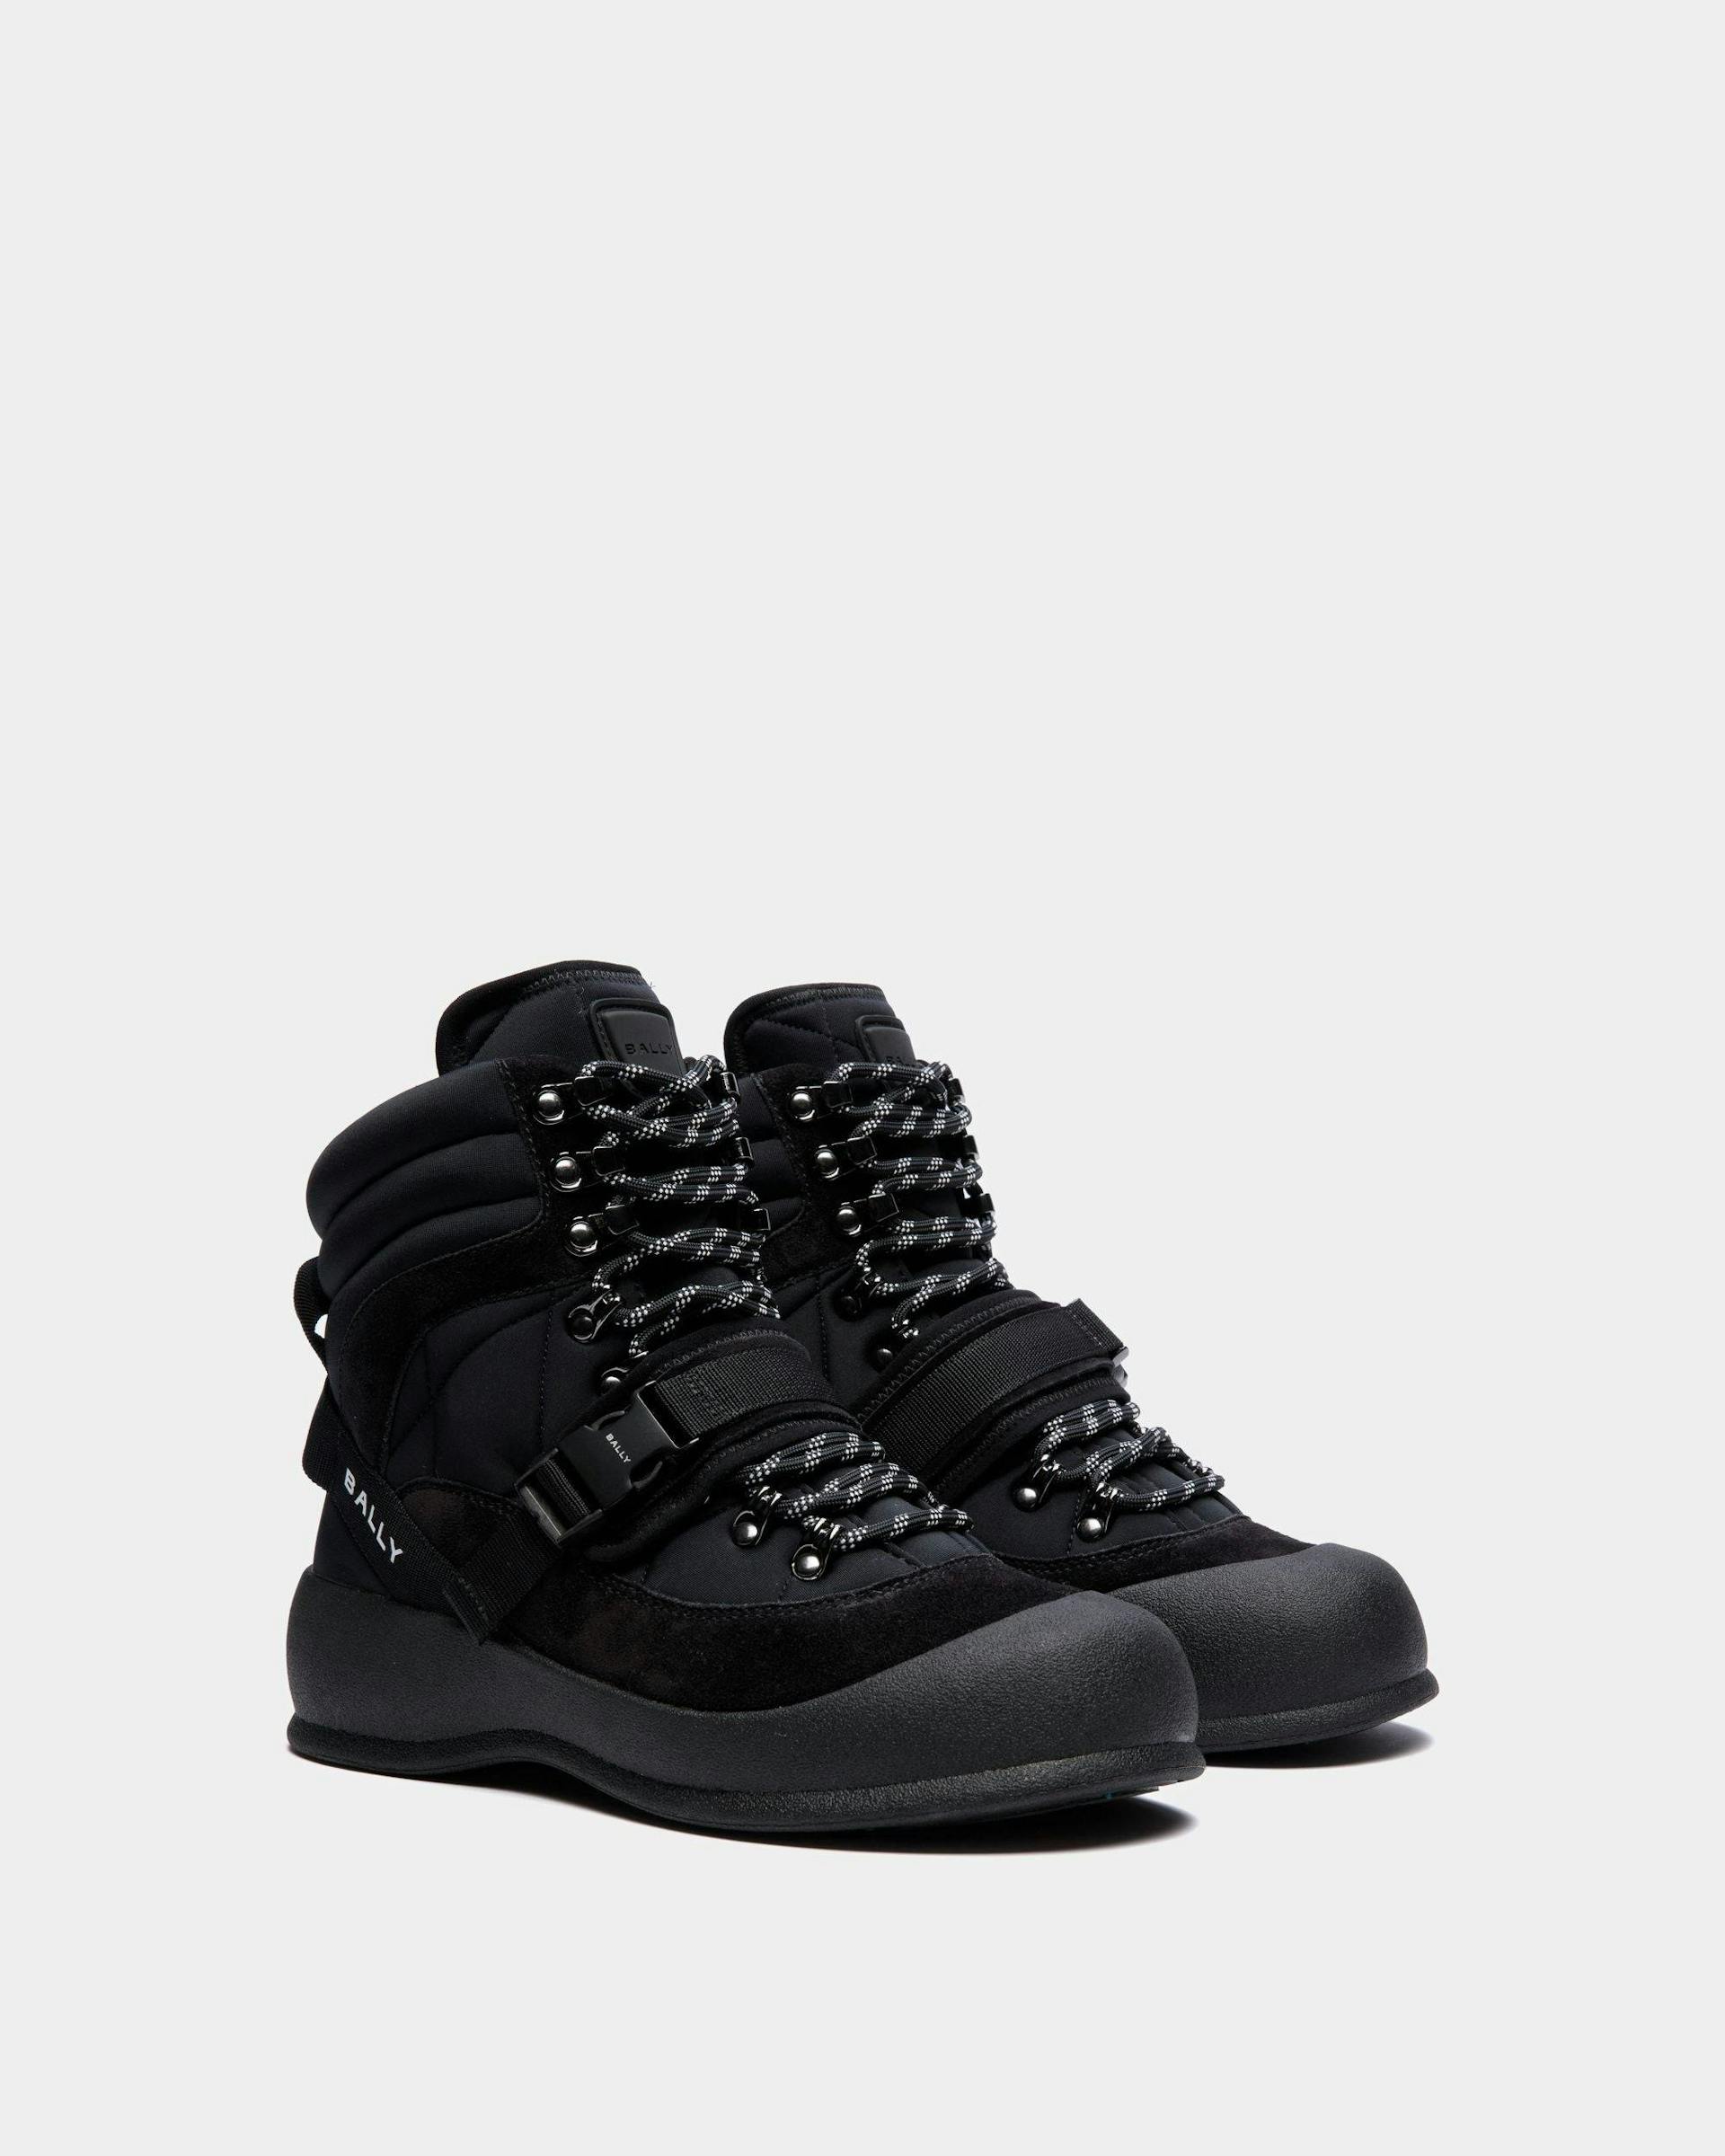 Women's Frei Lace-Up Boot In Black Nylon | Bally | Still Life 3/4 Front